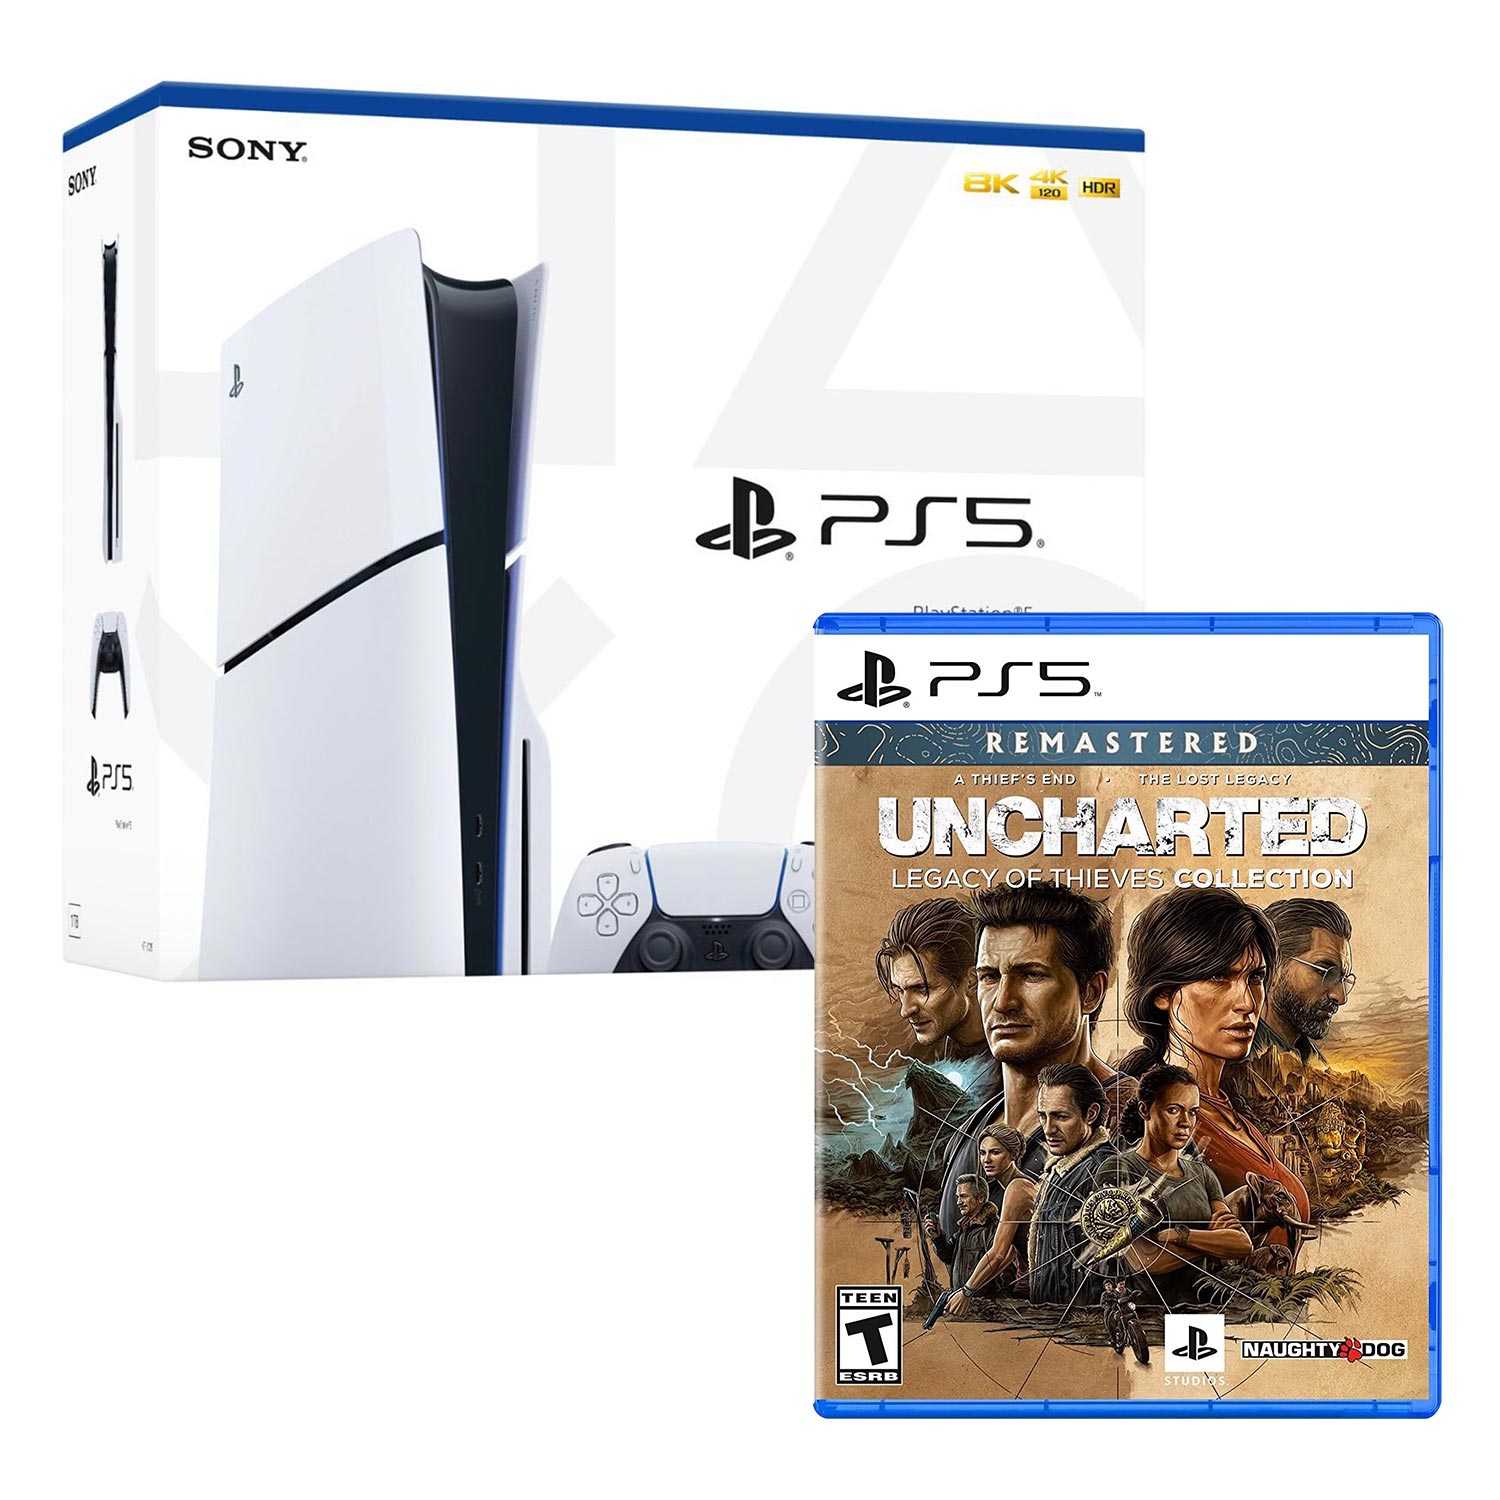 Consola PS5 Slim Con Lector de Discos + Uncharted Legacy of Thieves Collection